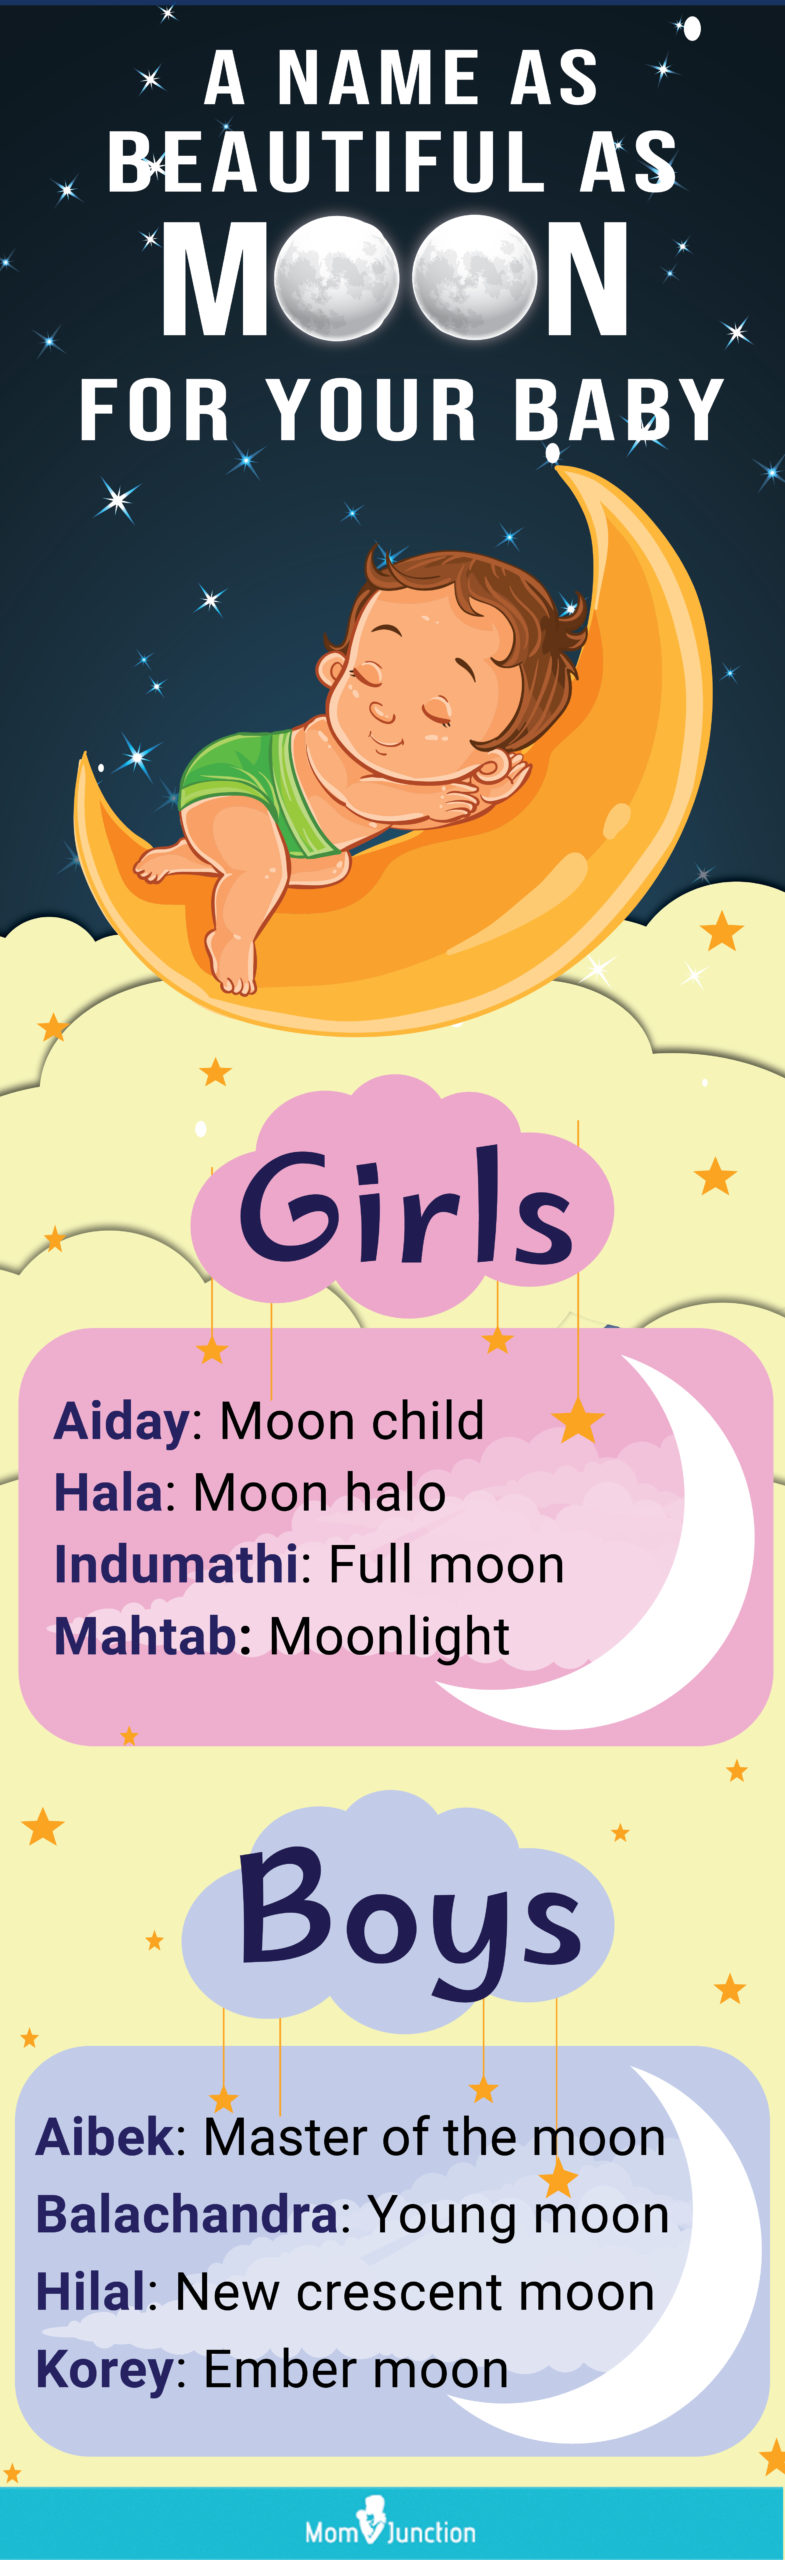 names as beautiful as moon for your baby [infographic]